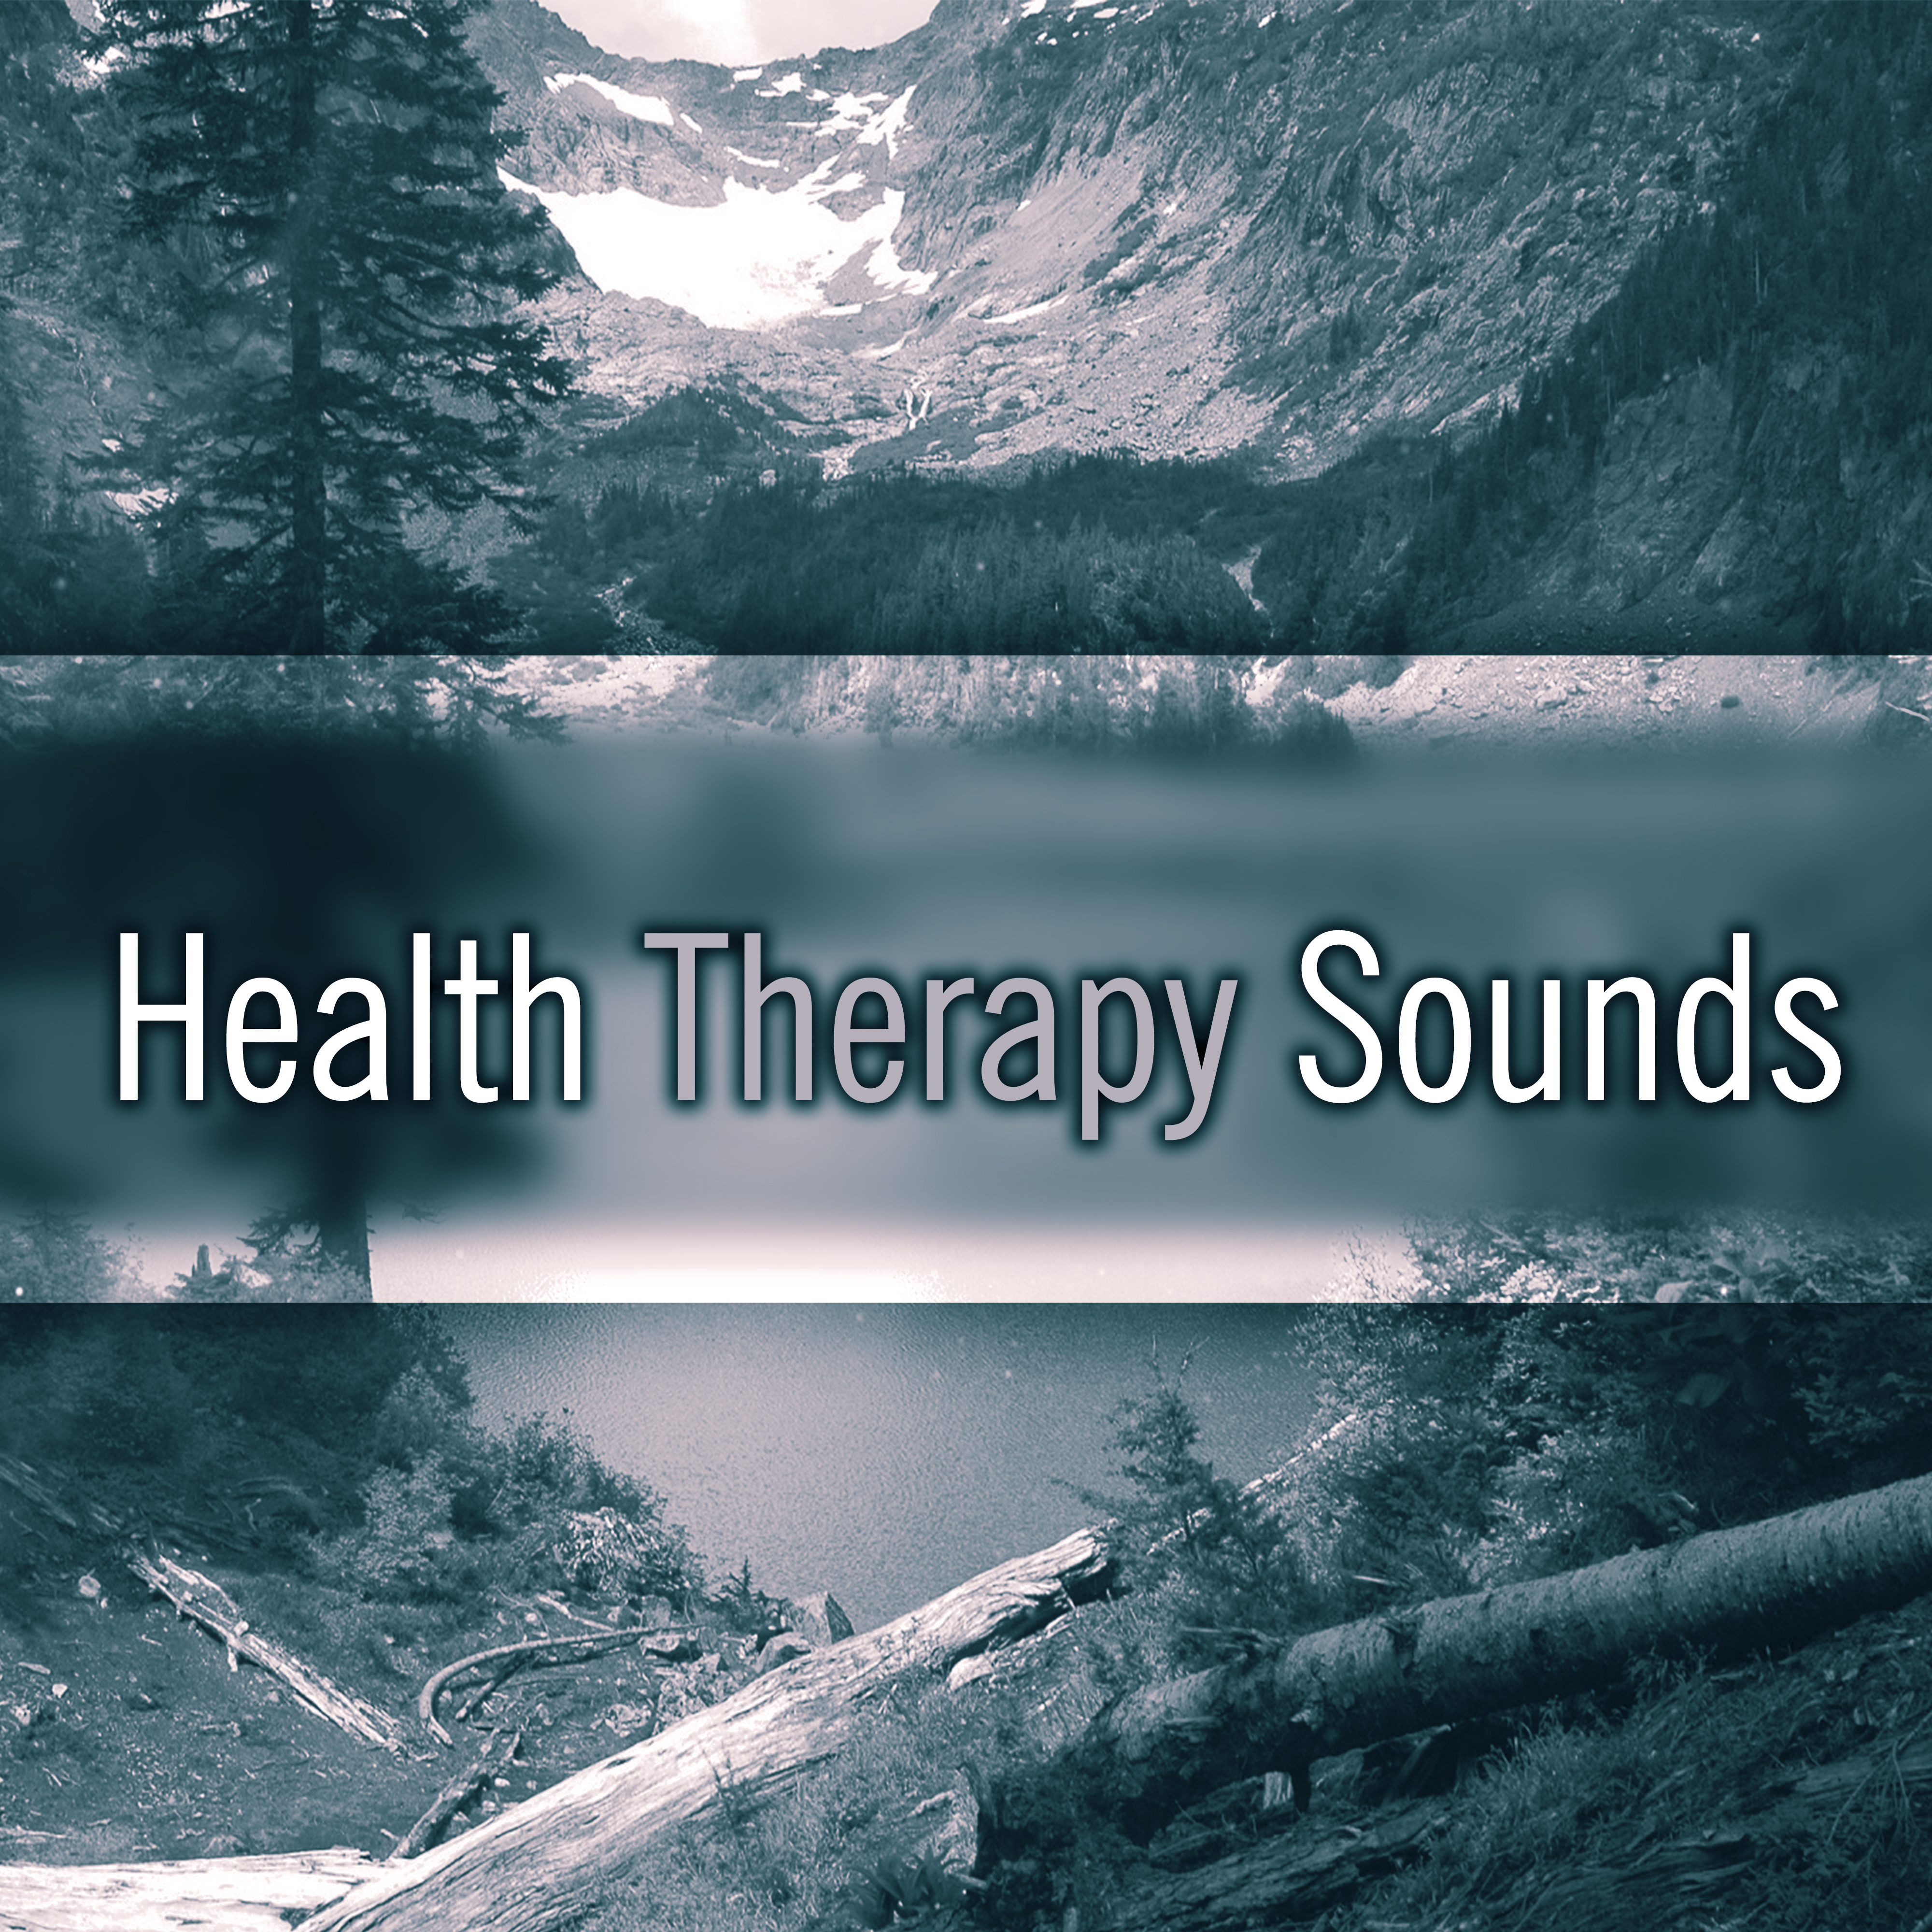 Health Therapy Sounds – Restful Music for Relaxation, Ocean Waves, Soothing Guitar, Calm Piano, Deep Sleep, Peaceful Mind